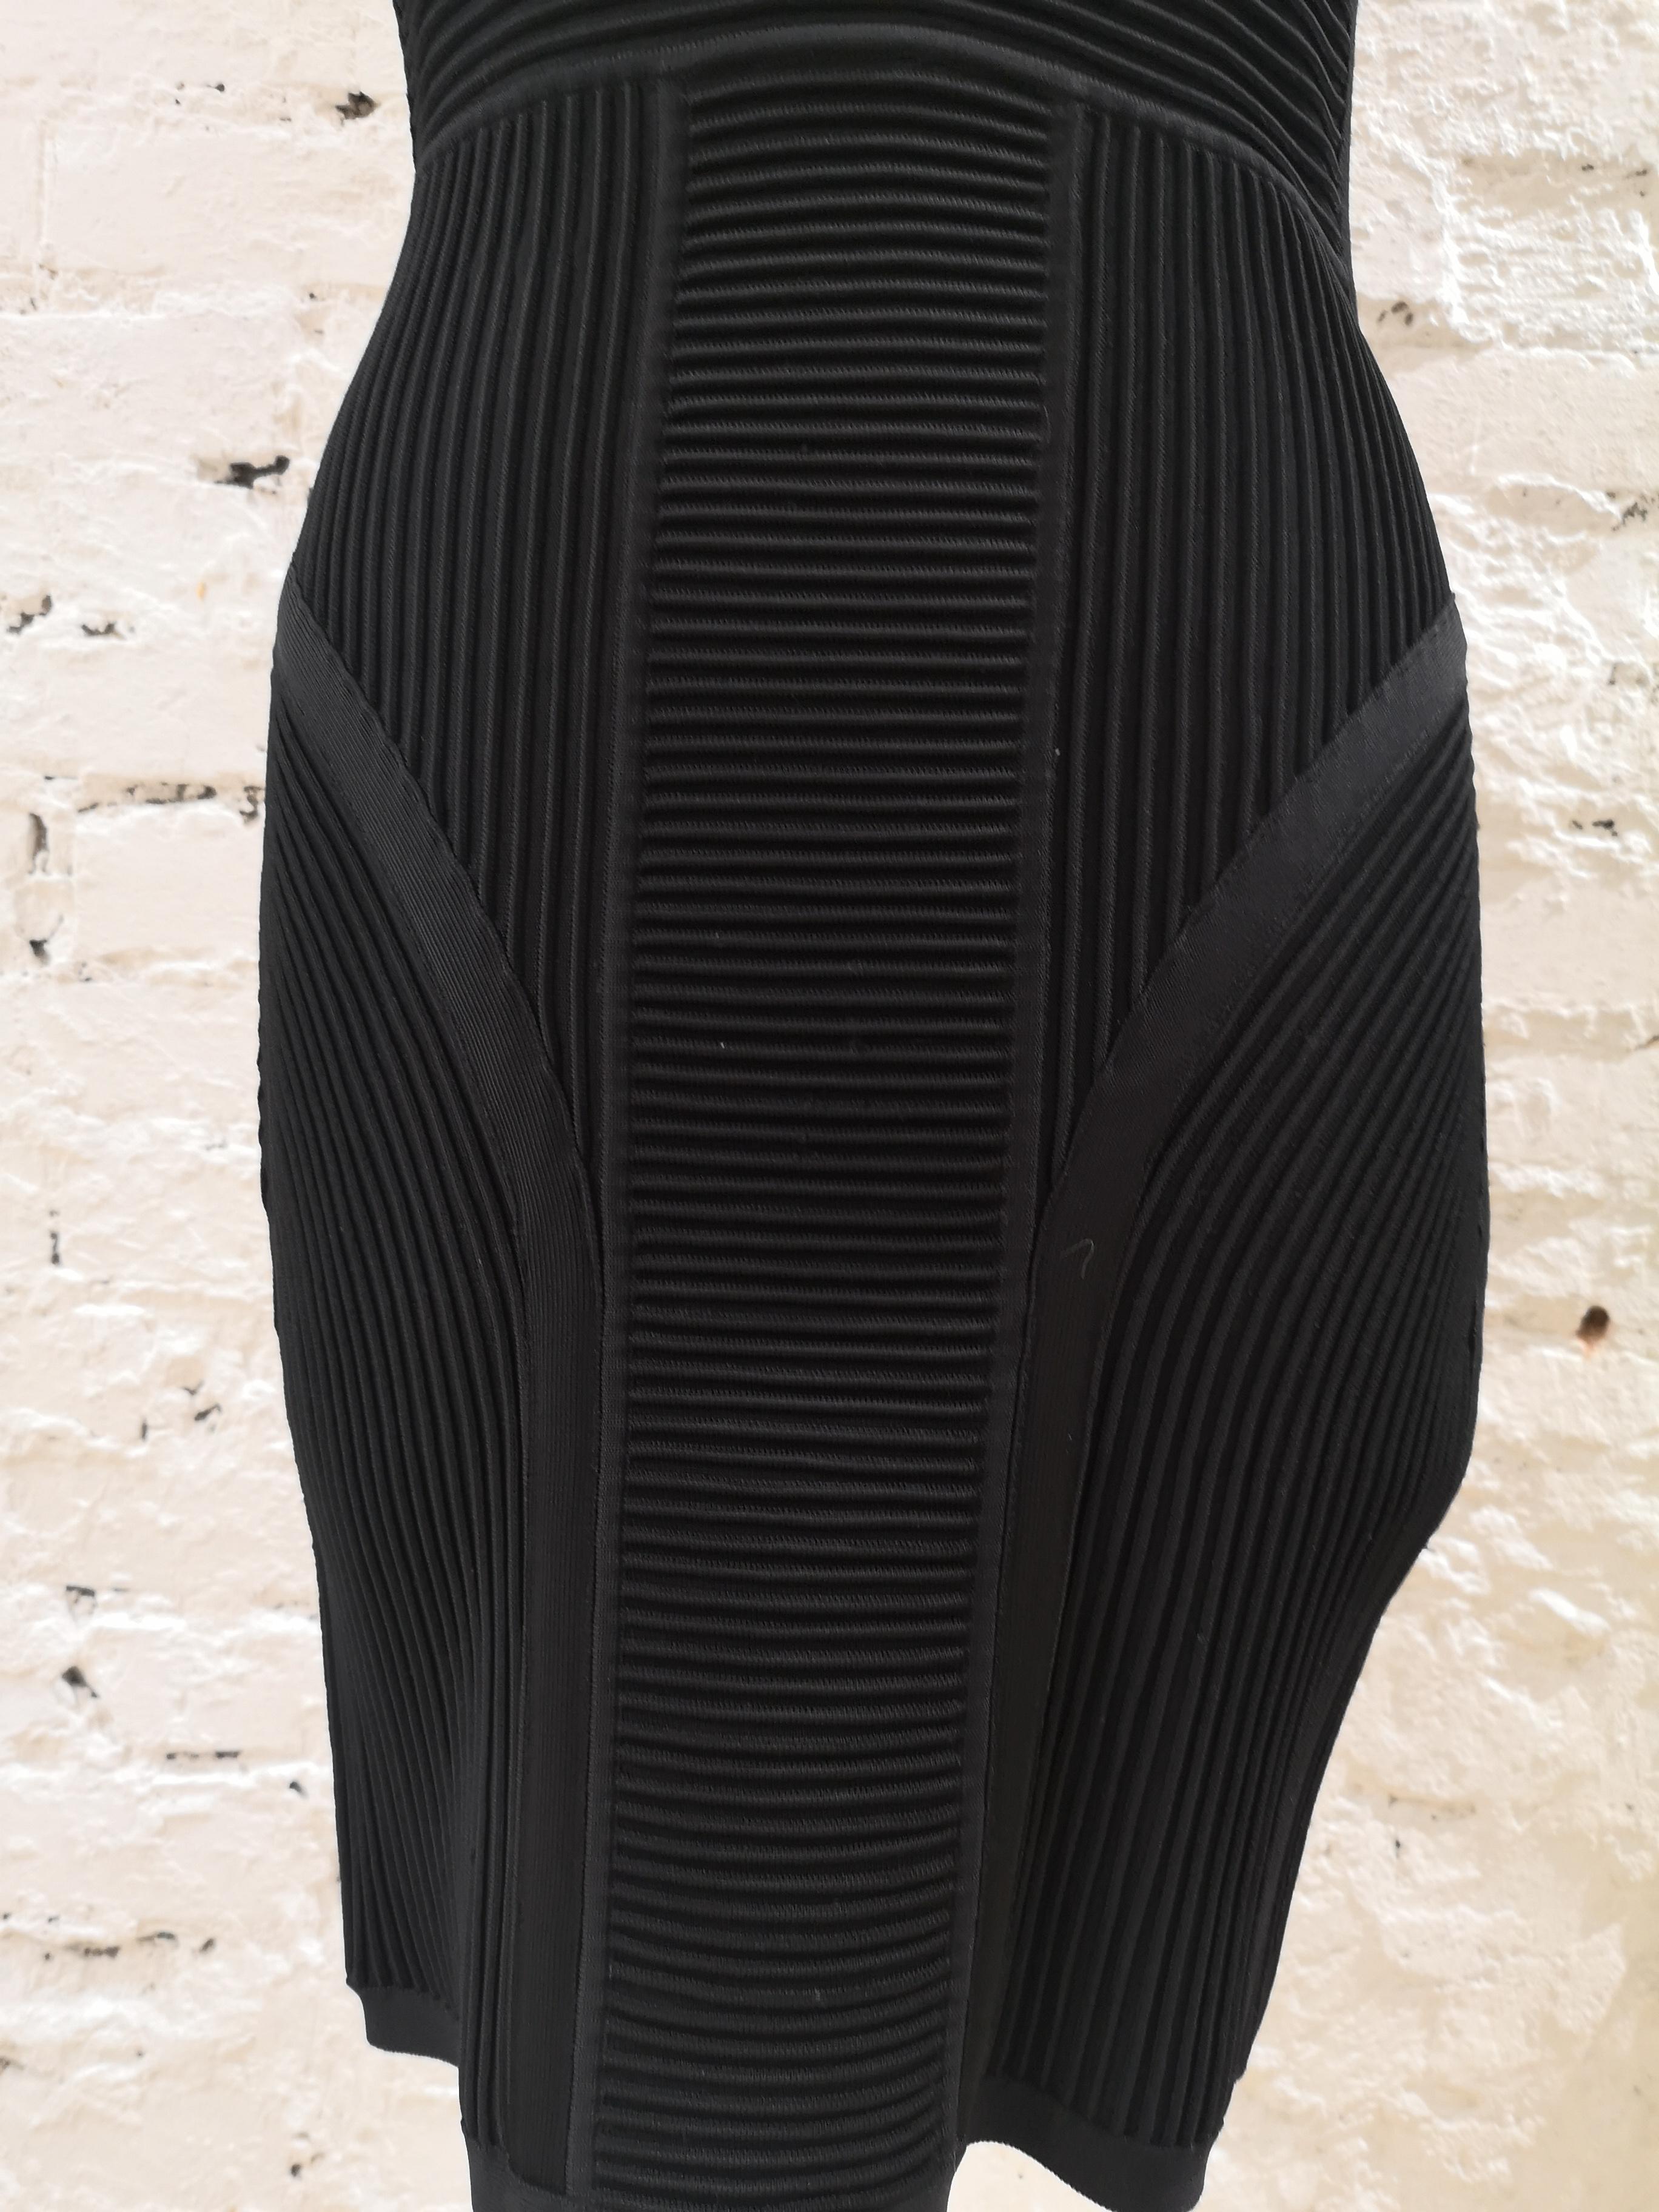 Herve Leger Black Dress In Excellent Condition For Sale In Capri, IT